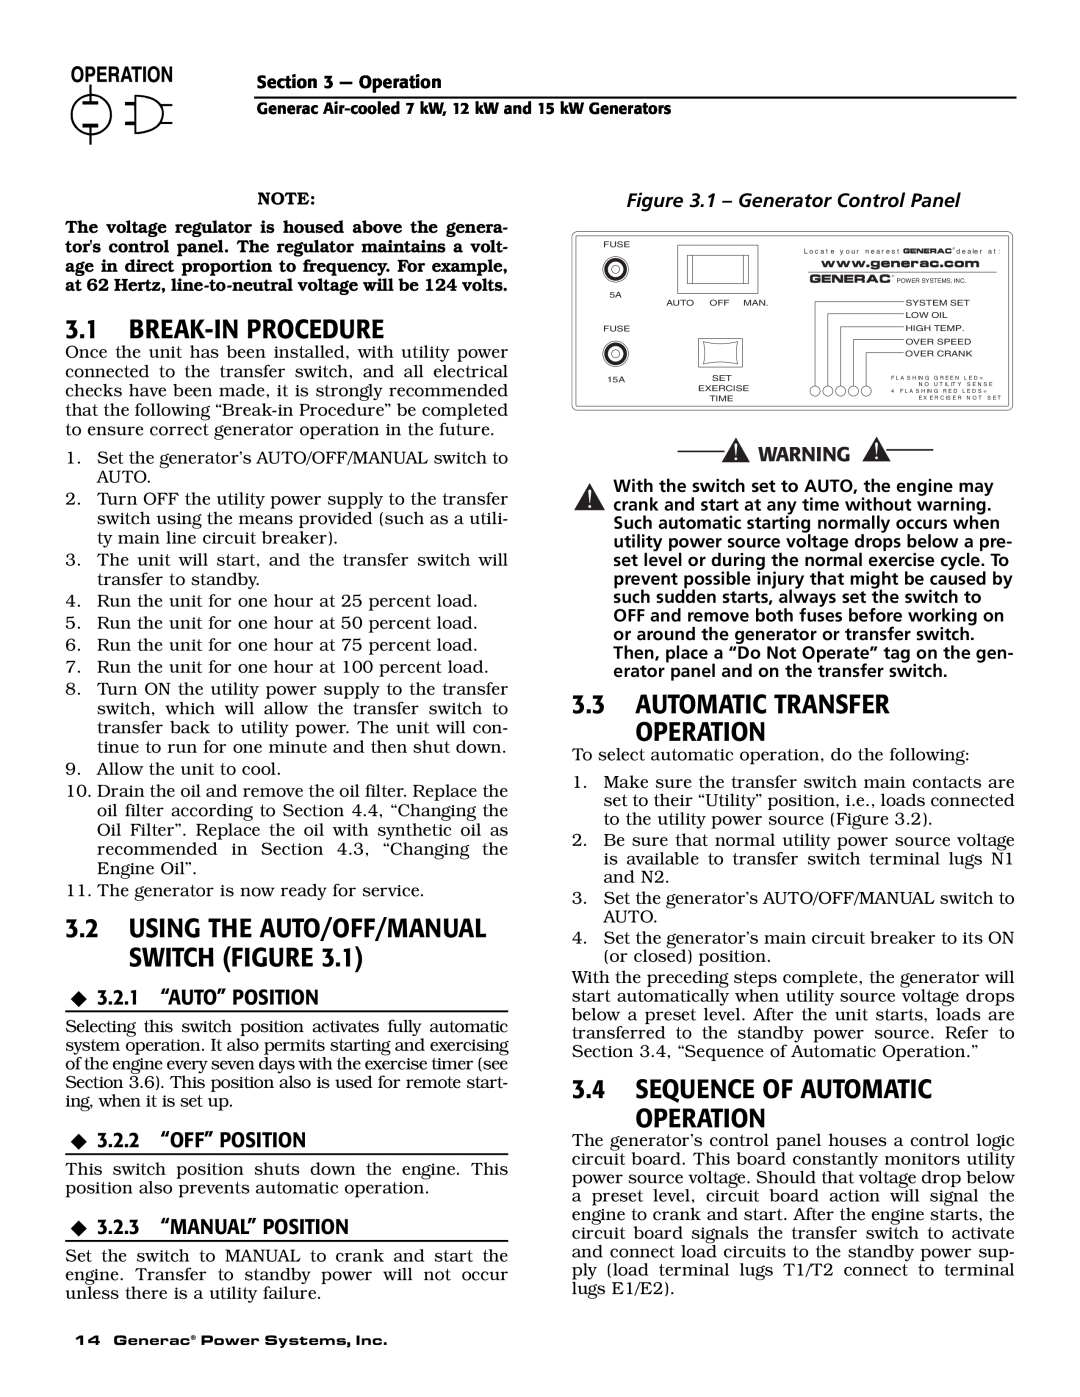 Generac 04675-3, 04673-2, 04674-2 Break-In Procedure, Automatic Transfer Operation, Sequence Of Automatic Operation 